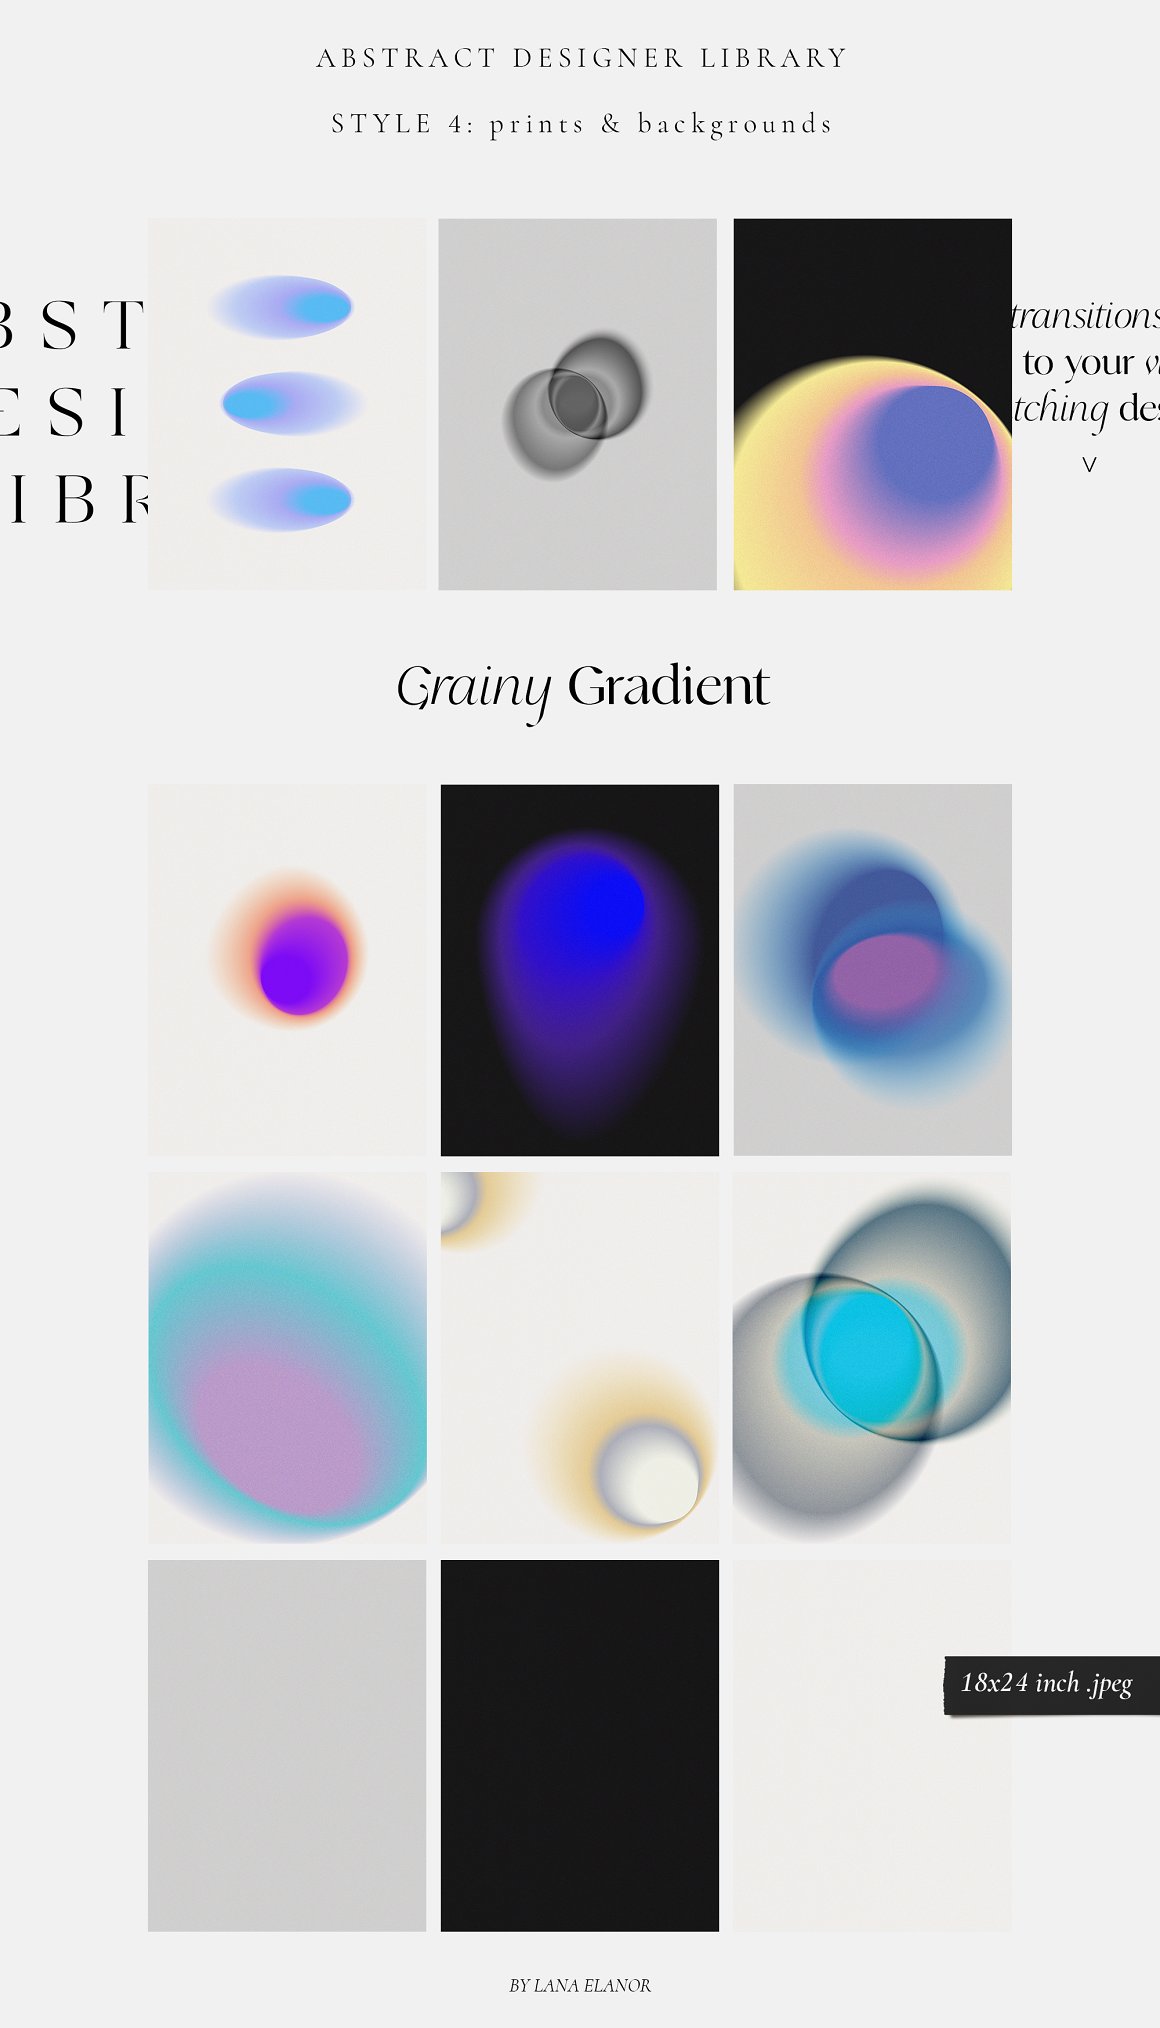 Grainy gradient library on a gray background.